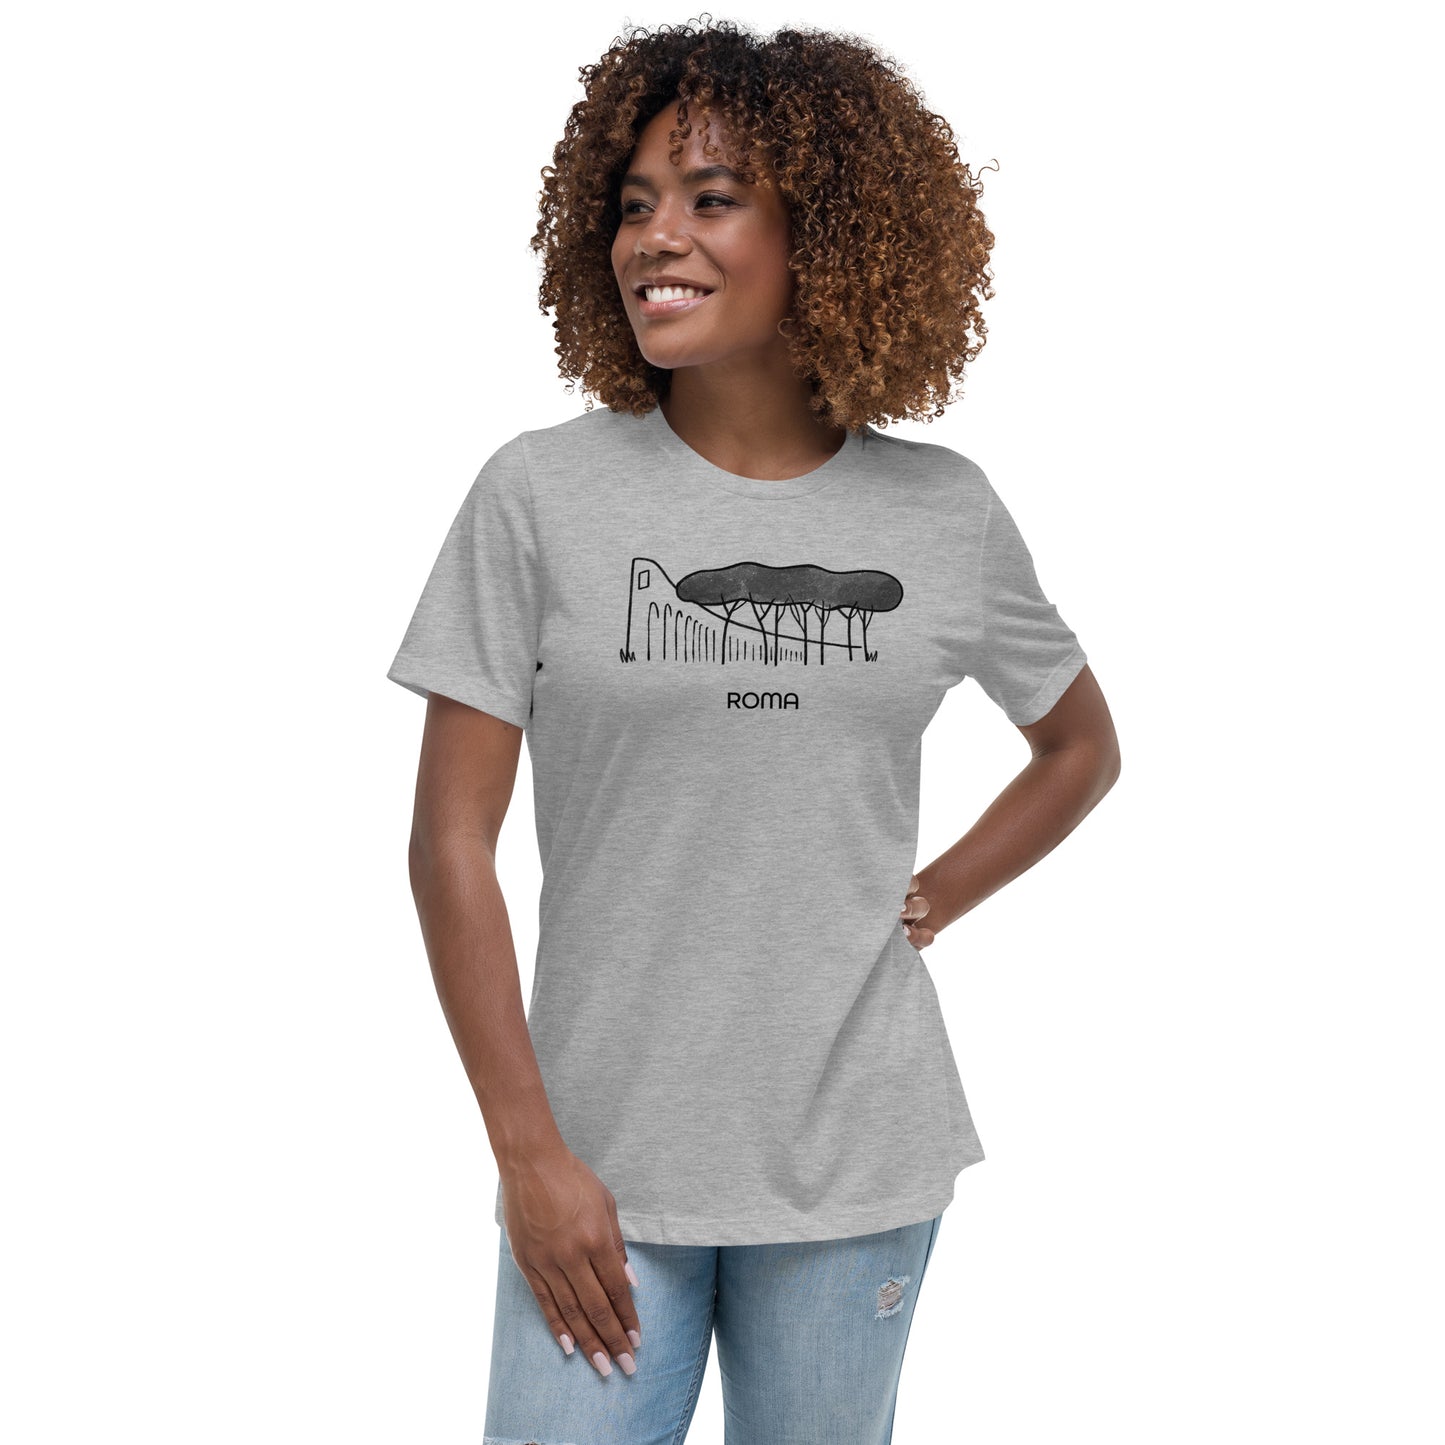 Roman Pine Trees on a Women's Relaxed T-Shirt